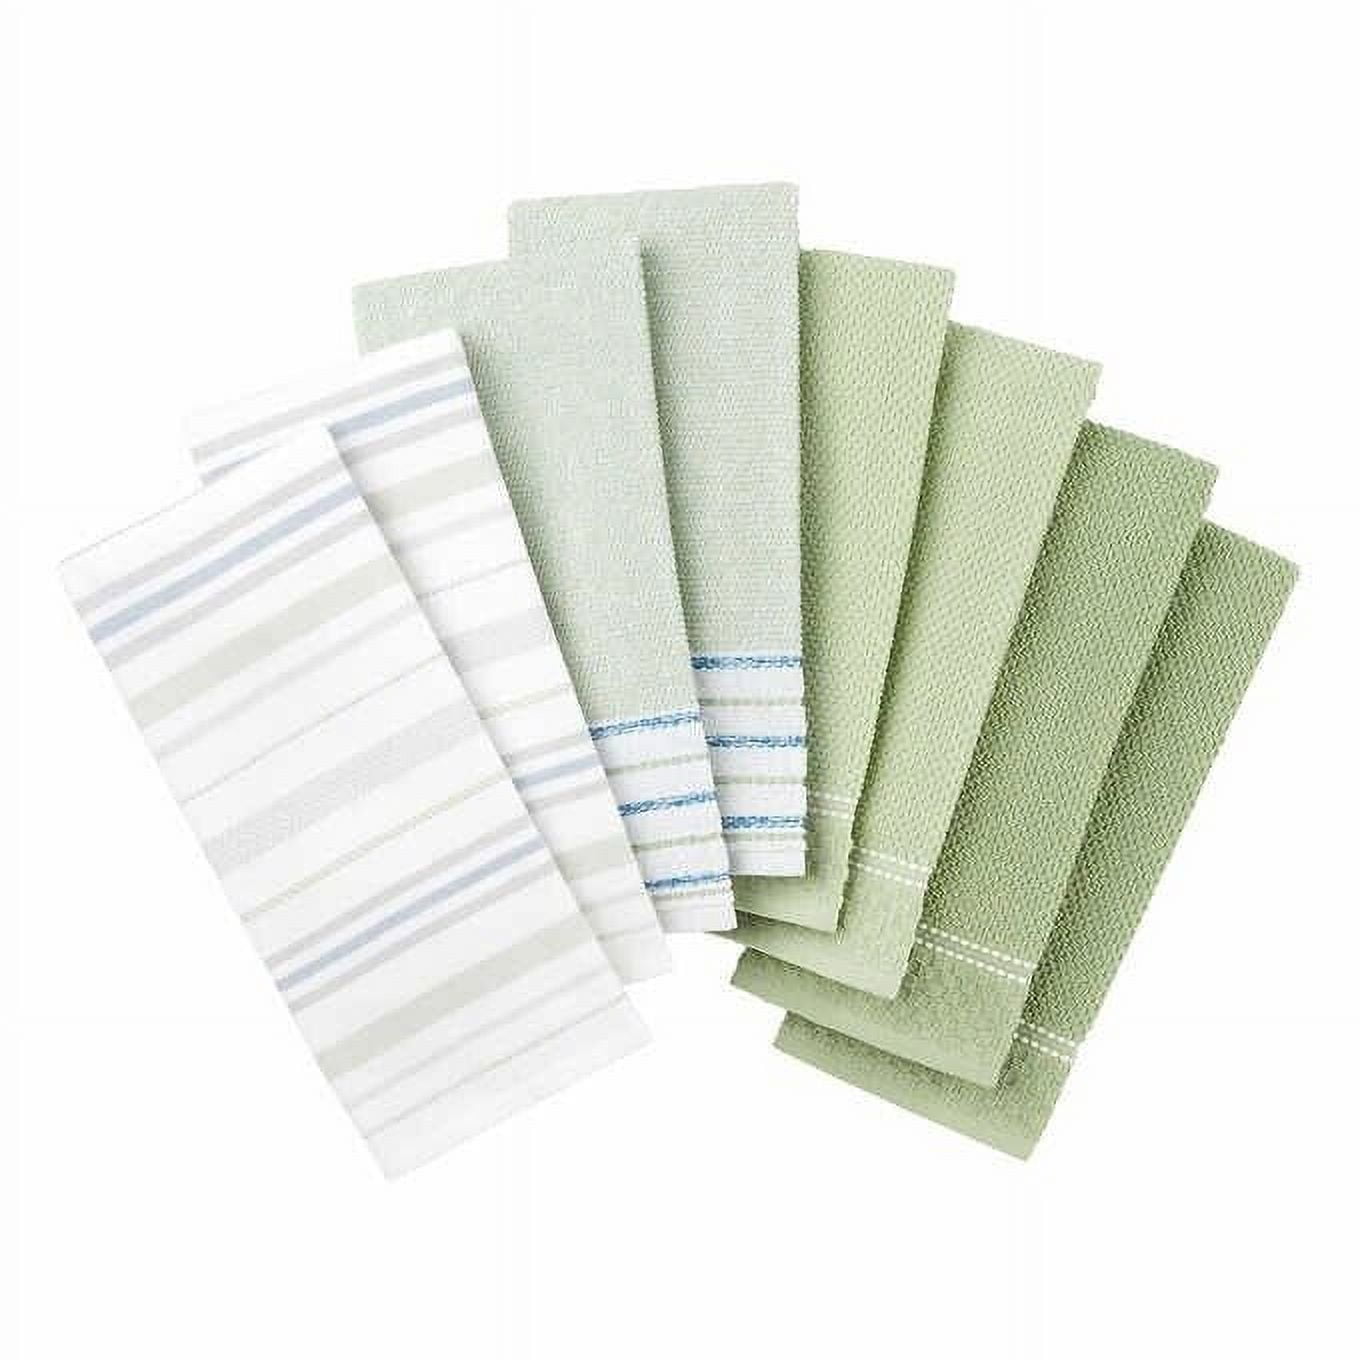 TOWN & COUNTRY LIVING ORGANIC KITCHEN TOWELS GREEN 16 X 28 100% COTTON NWT